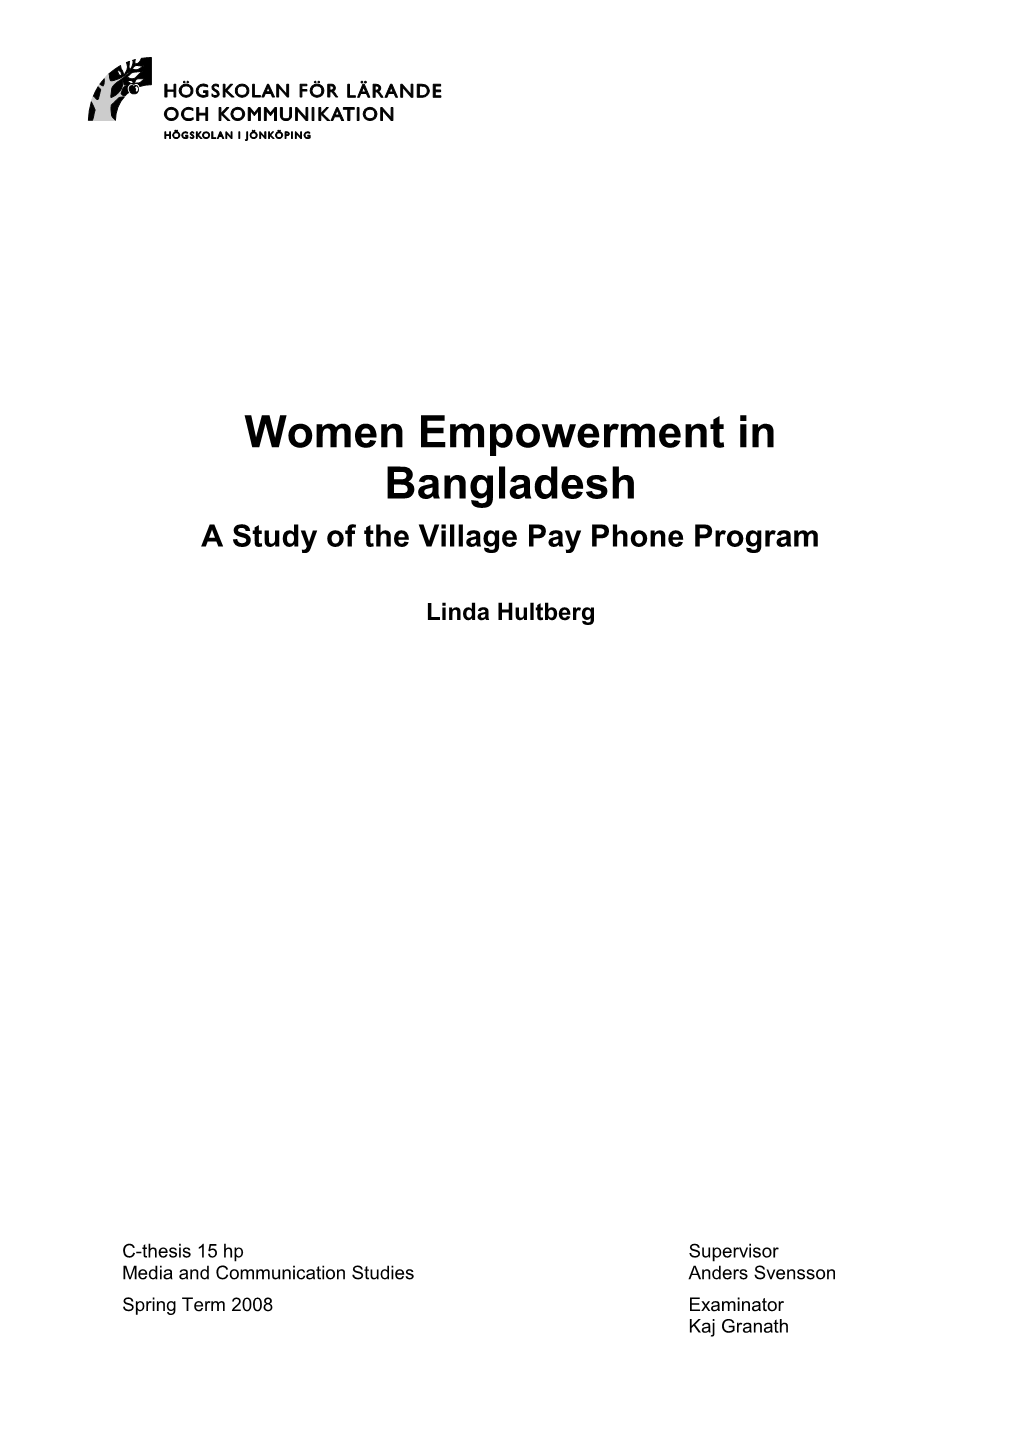 Women Empowerment in Bangladesh a Study of the Village Pay Phone Program